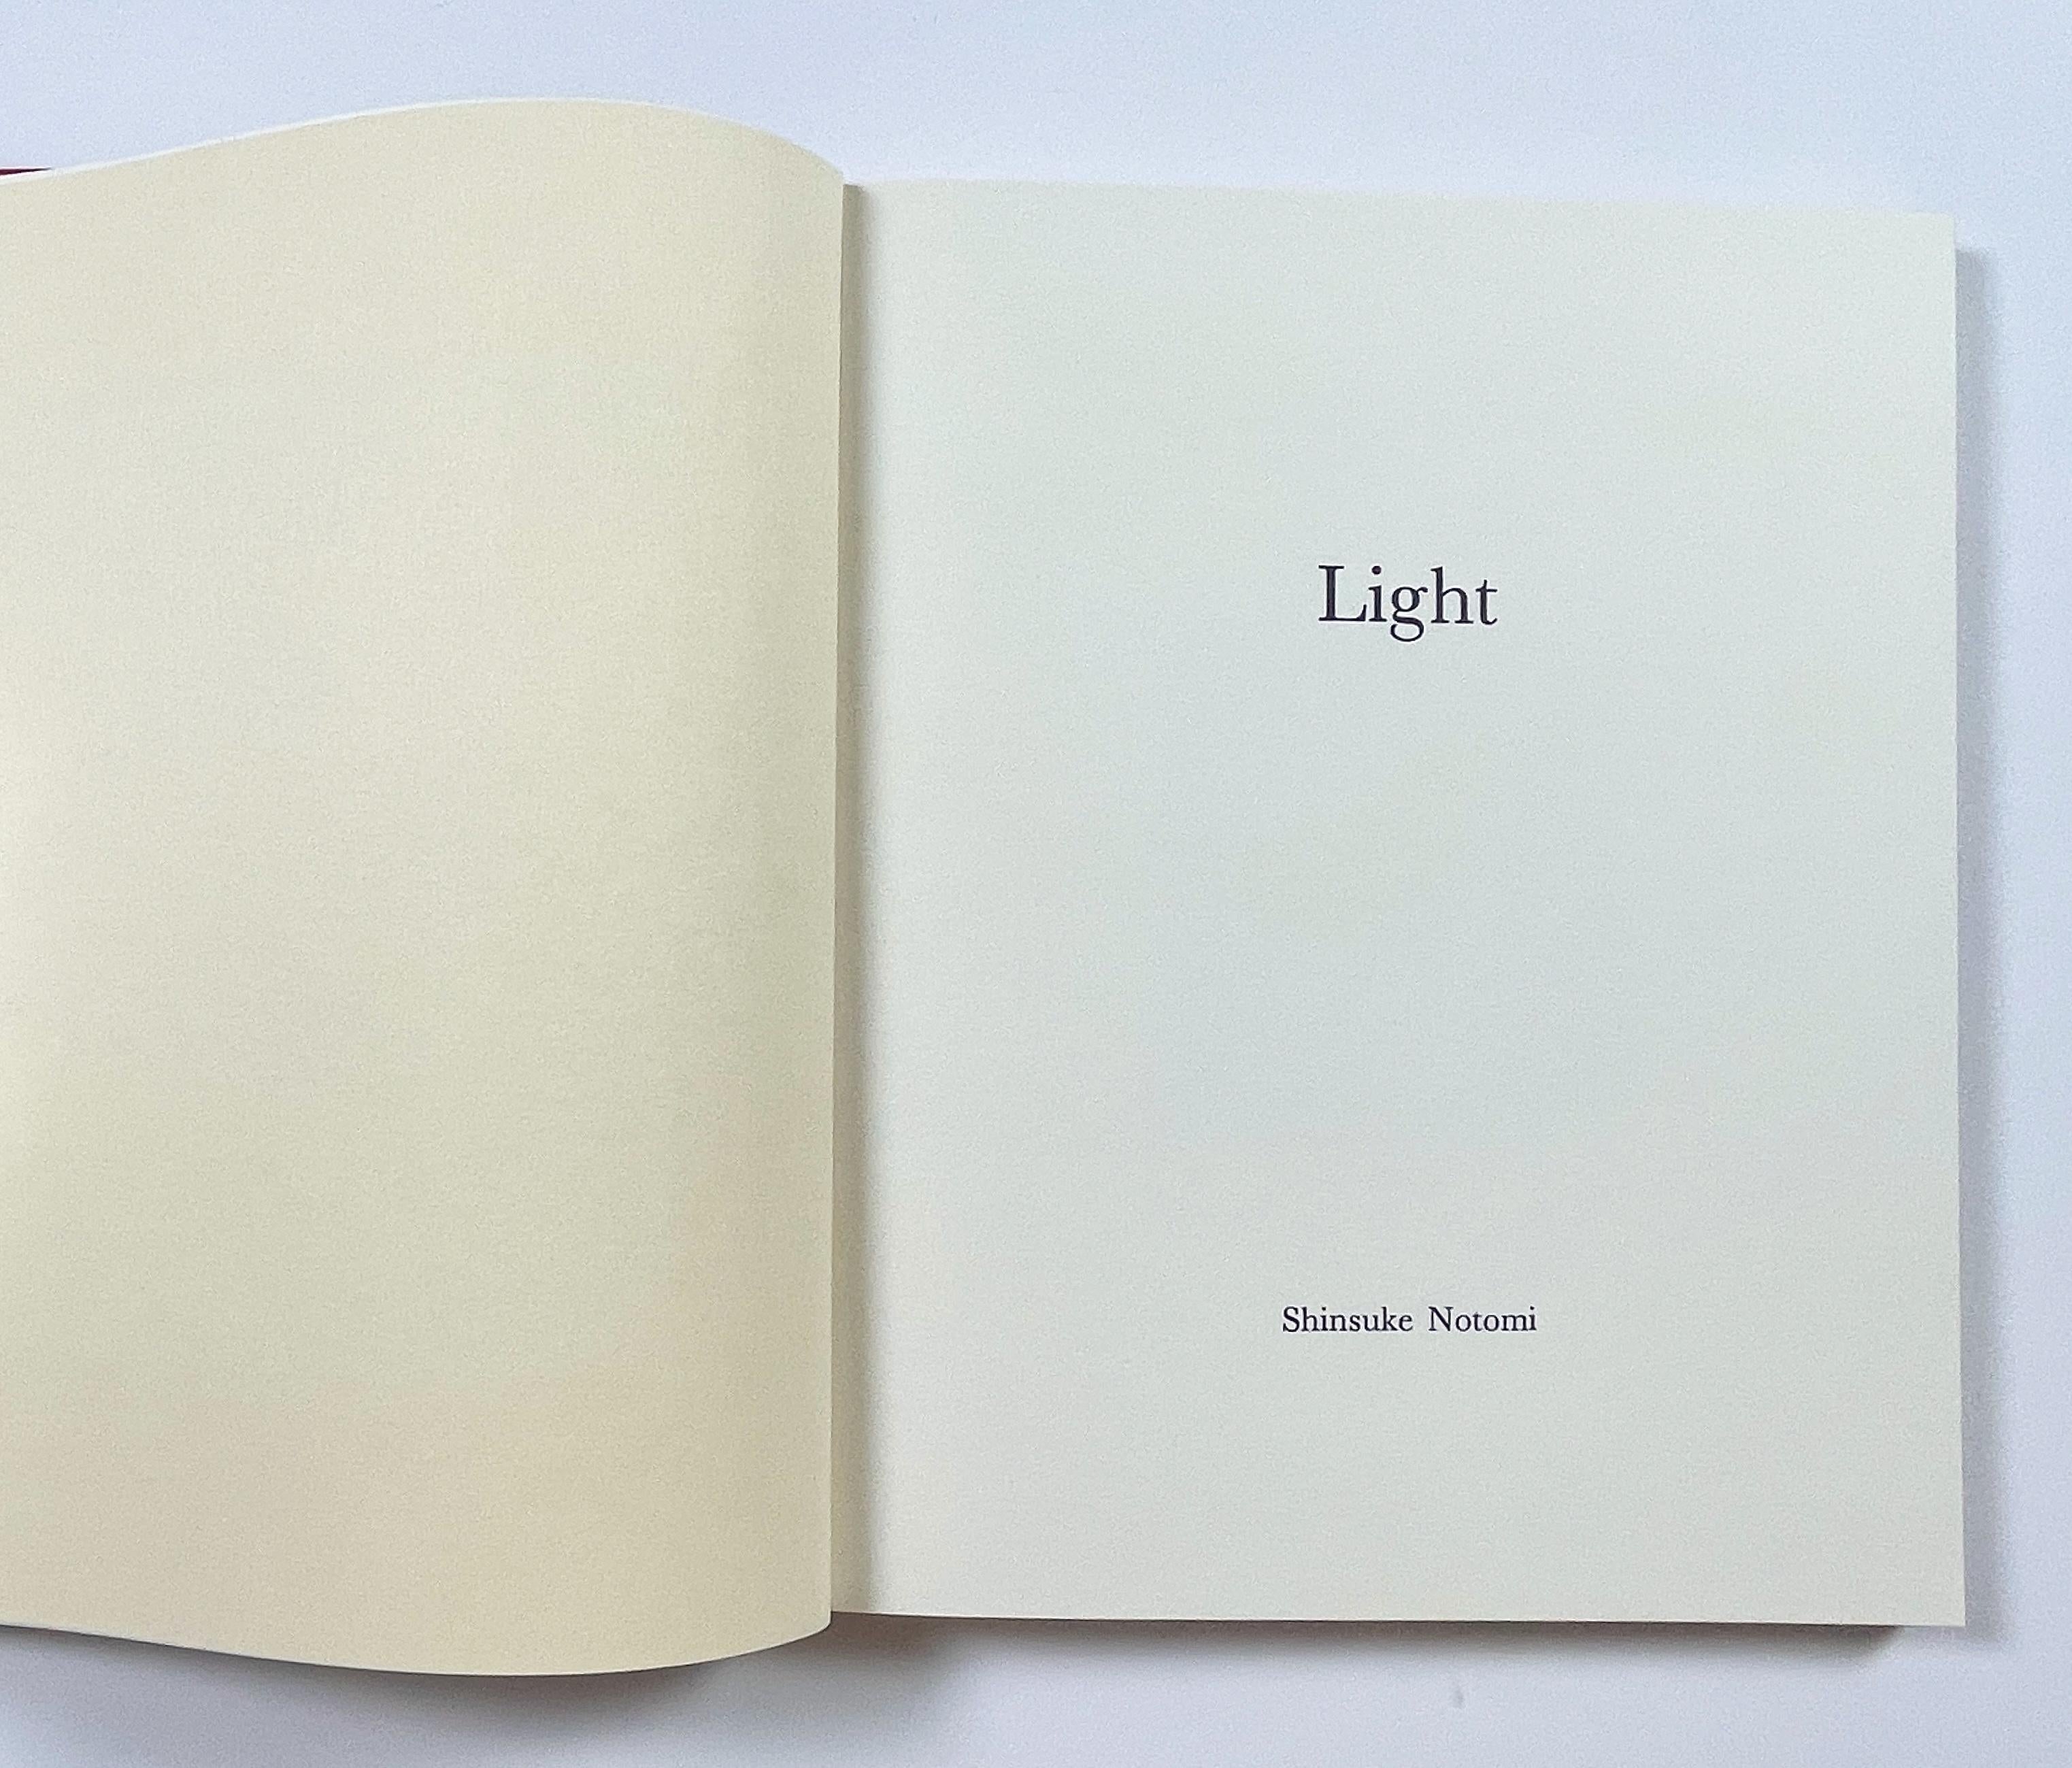 Light by Shinsuke Notomi book and print with poem and Japanese brushwork For Sale 4